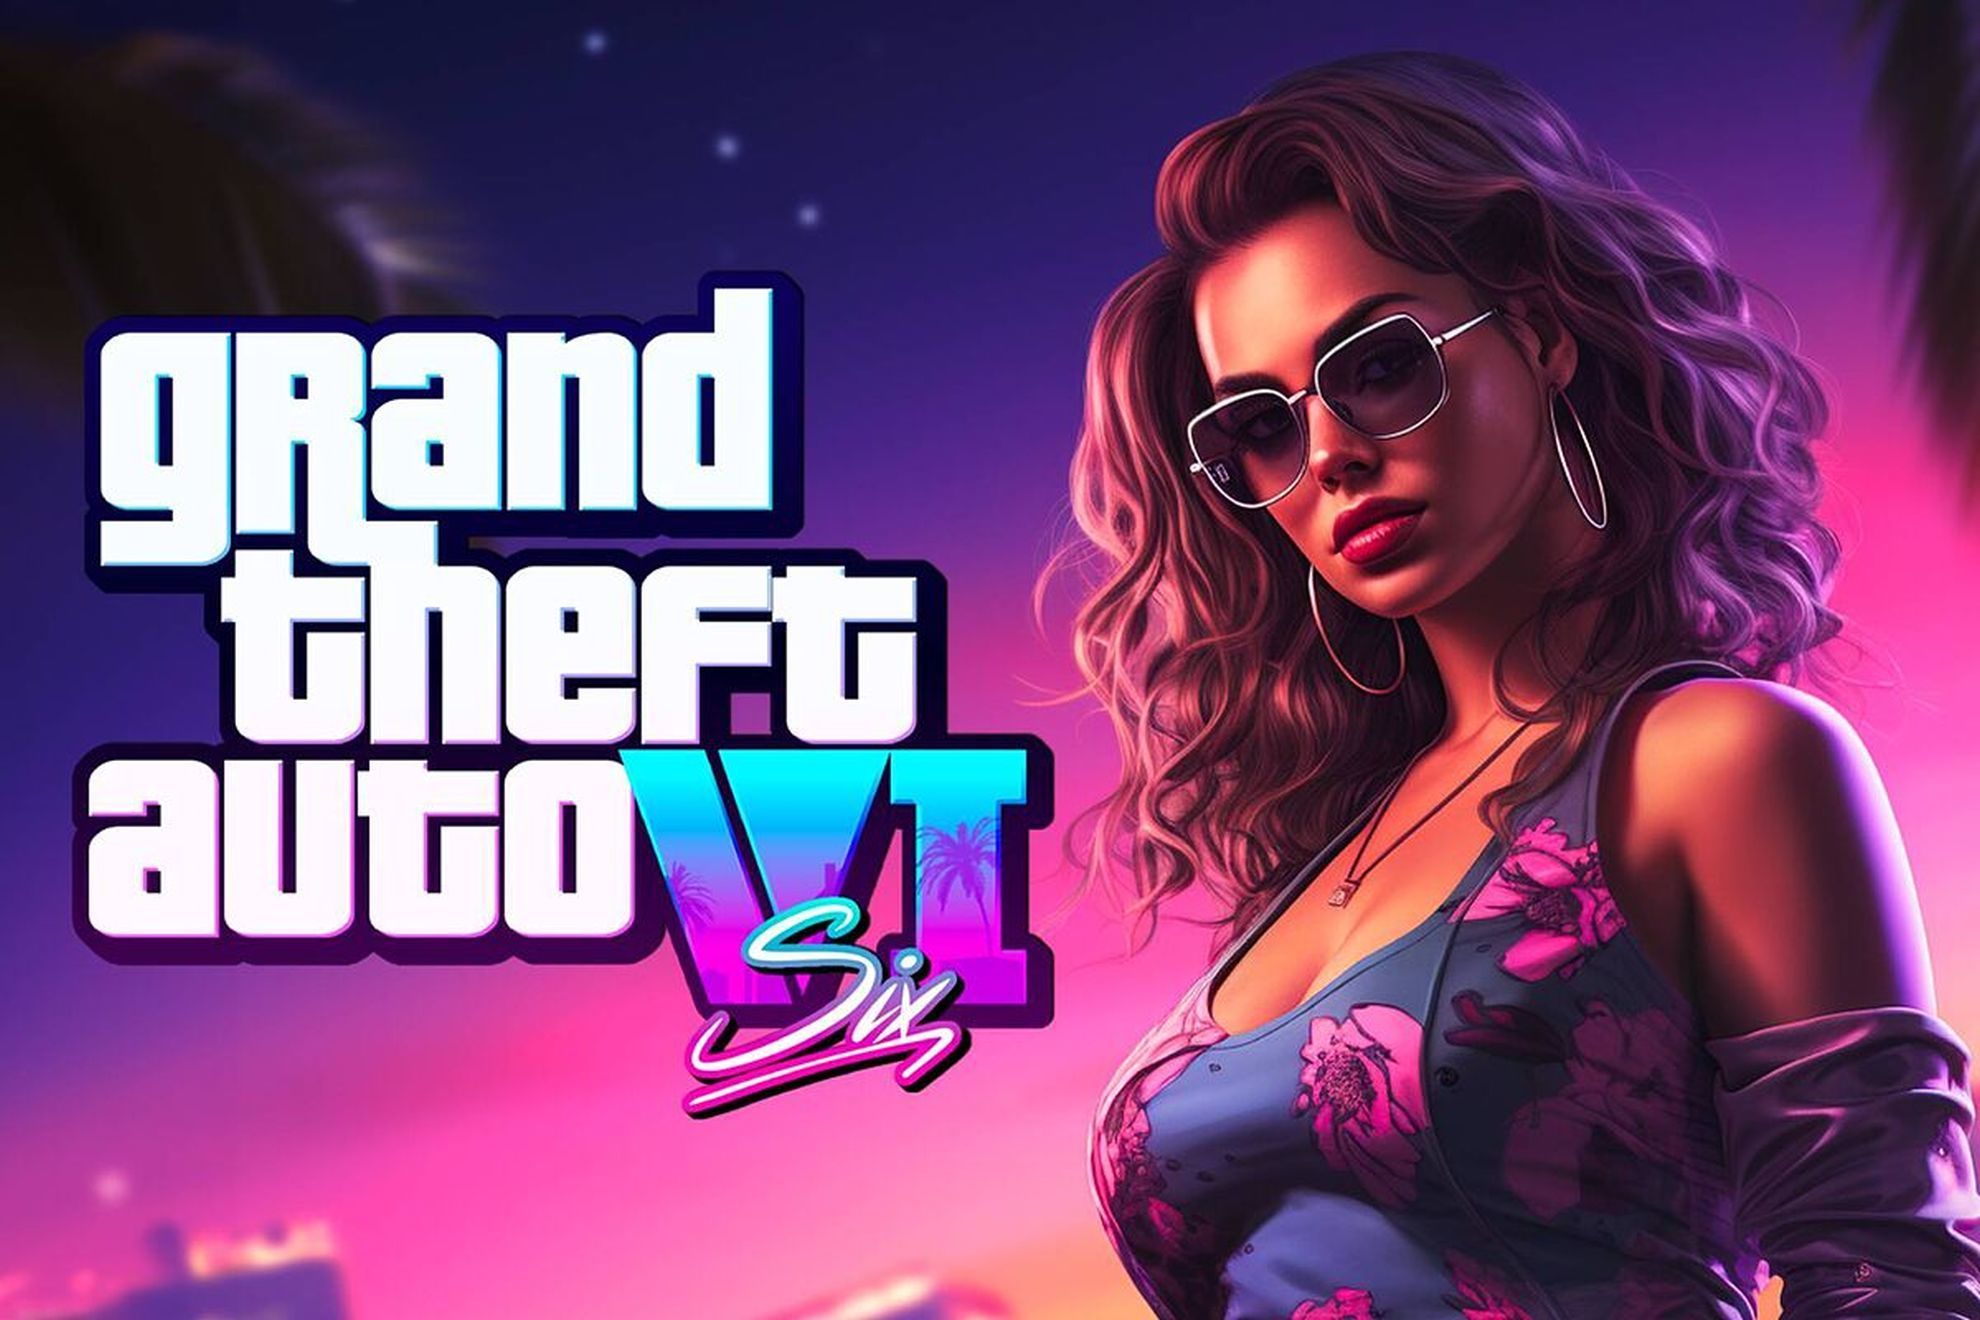 Why Did Rockstar Release The Gta 6 Trailer Early?